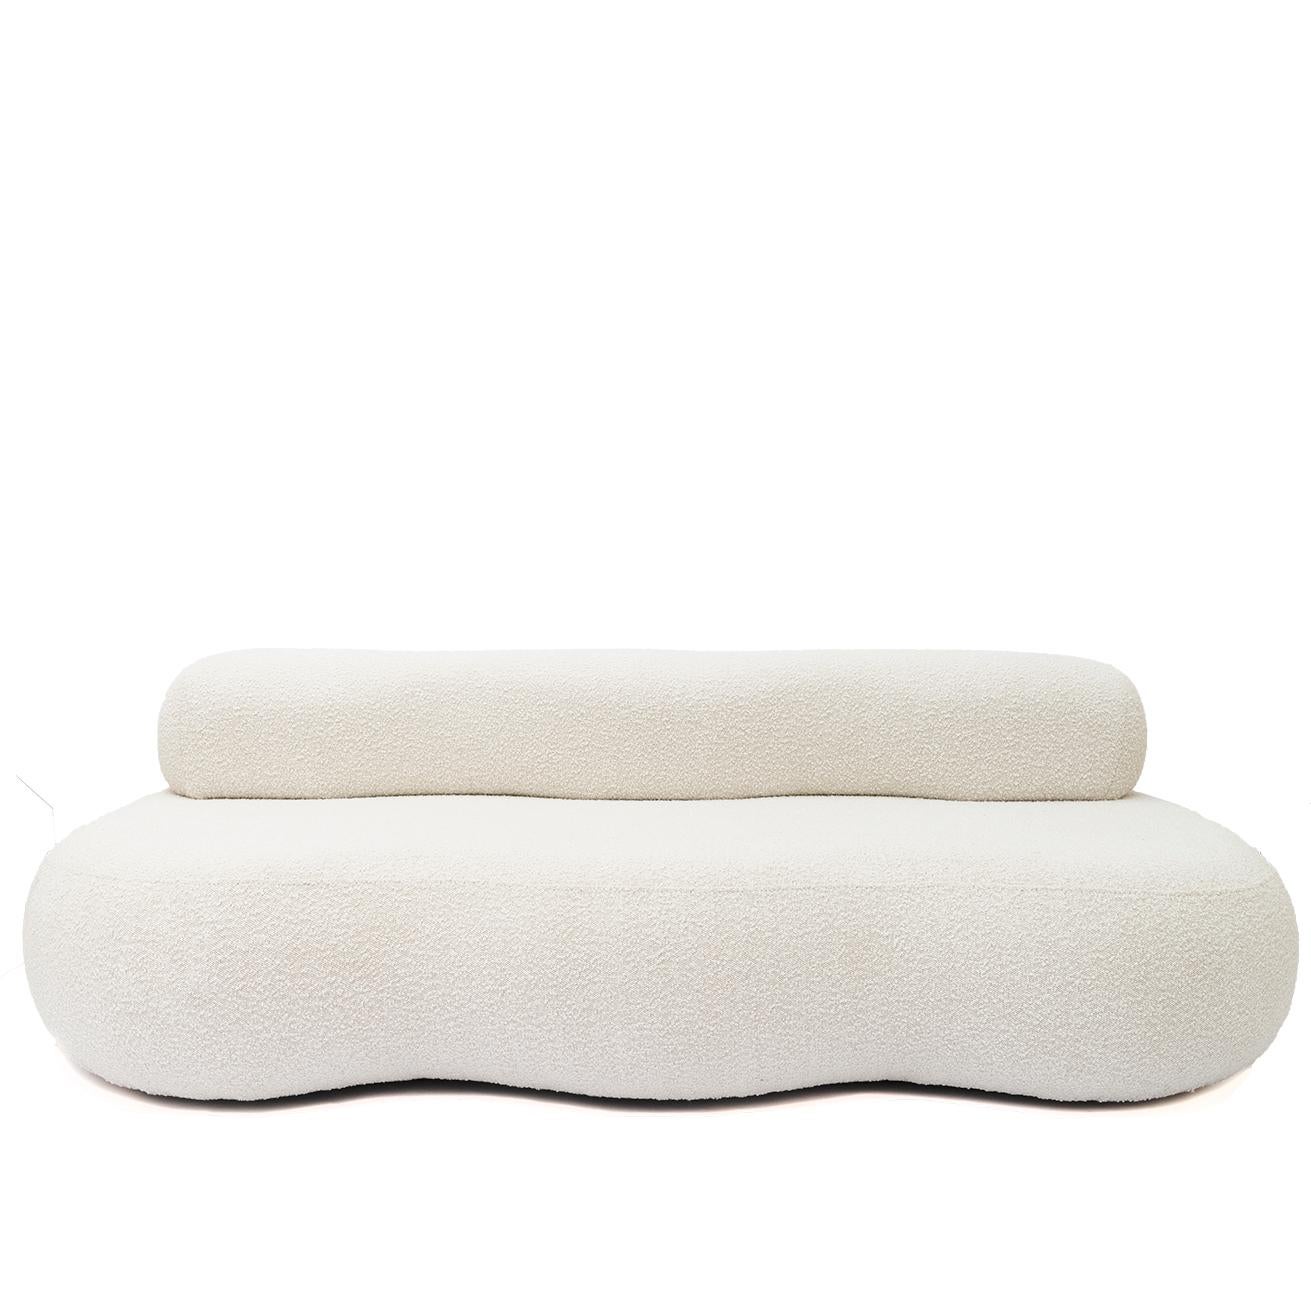 Object 083 Sofa by NG Design
Dimensions: W 210 x D 100 x H 69 cm
Materials: Bouclé Fabric

Also Available: All of objects available in different materials and colors on demand.

The Object 083 Sofa is a wavy form upholstered in boucle fabric. 

